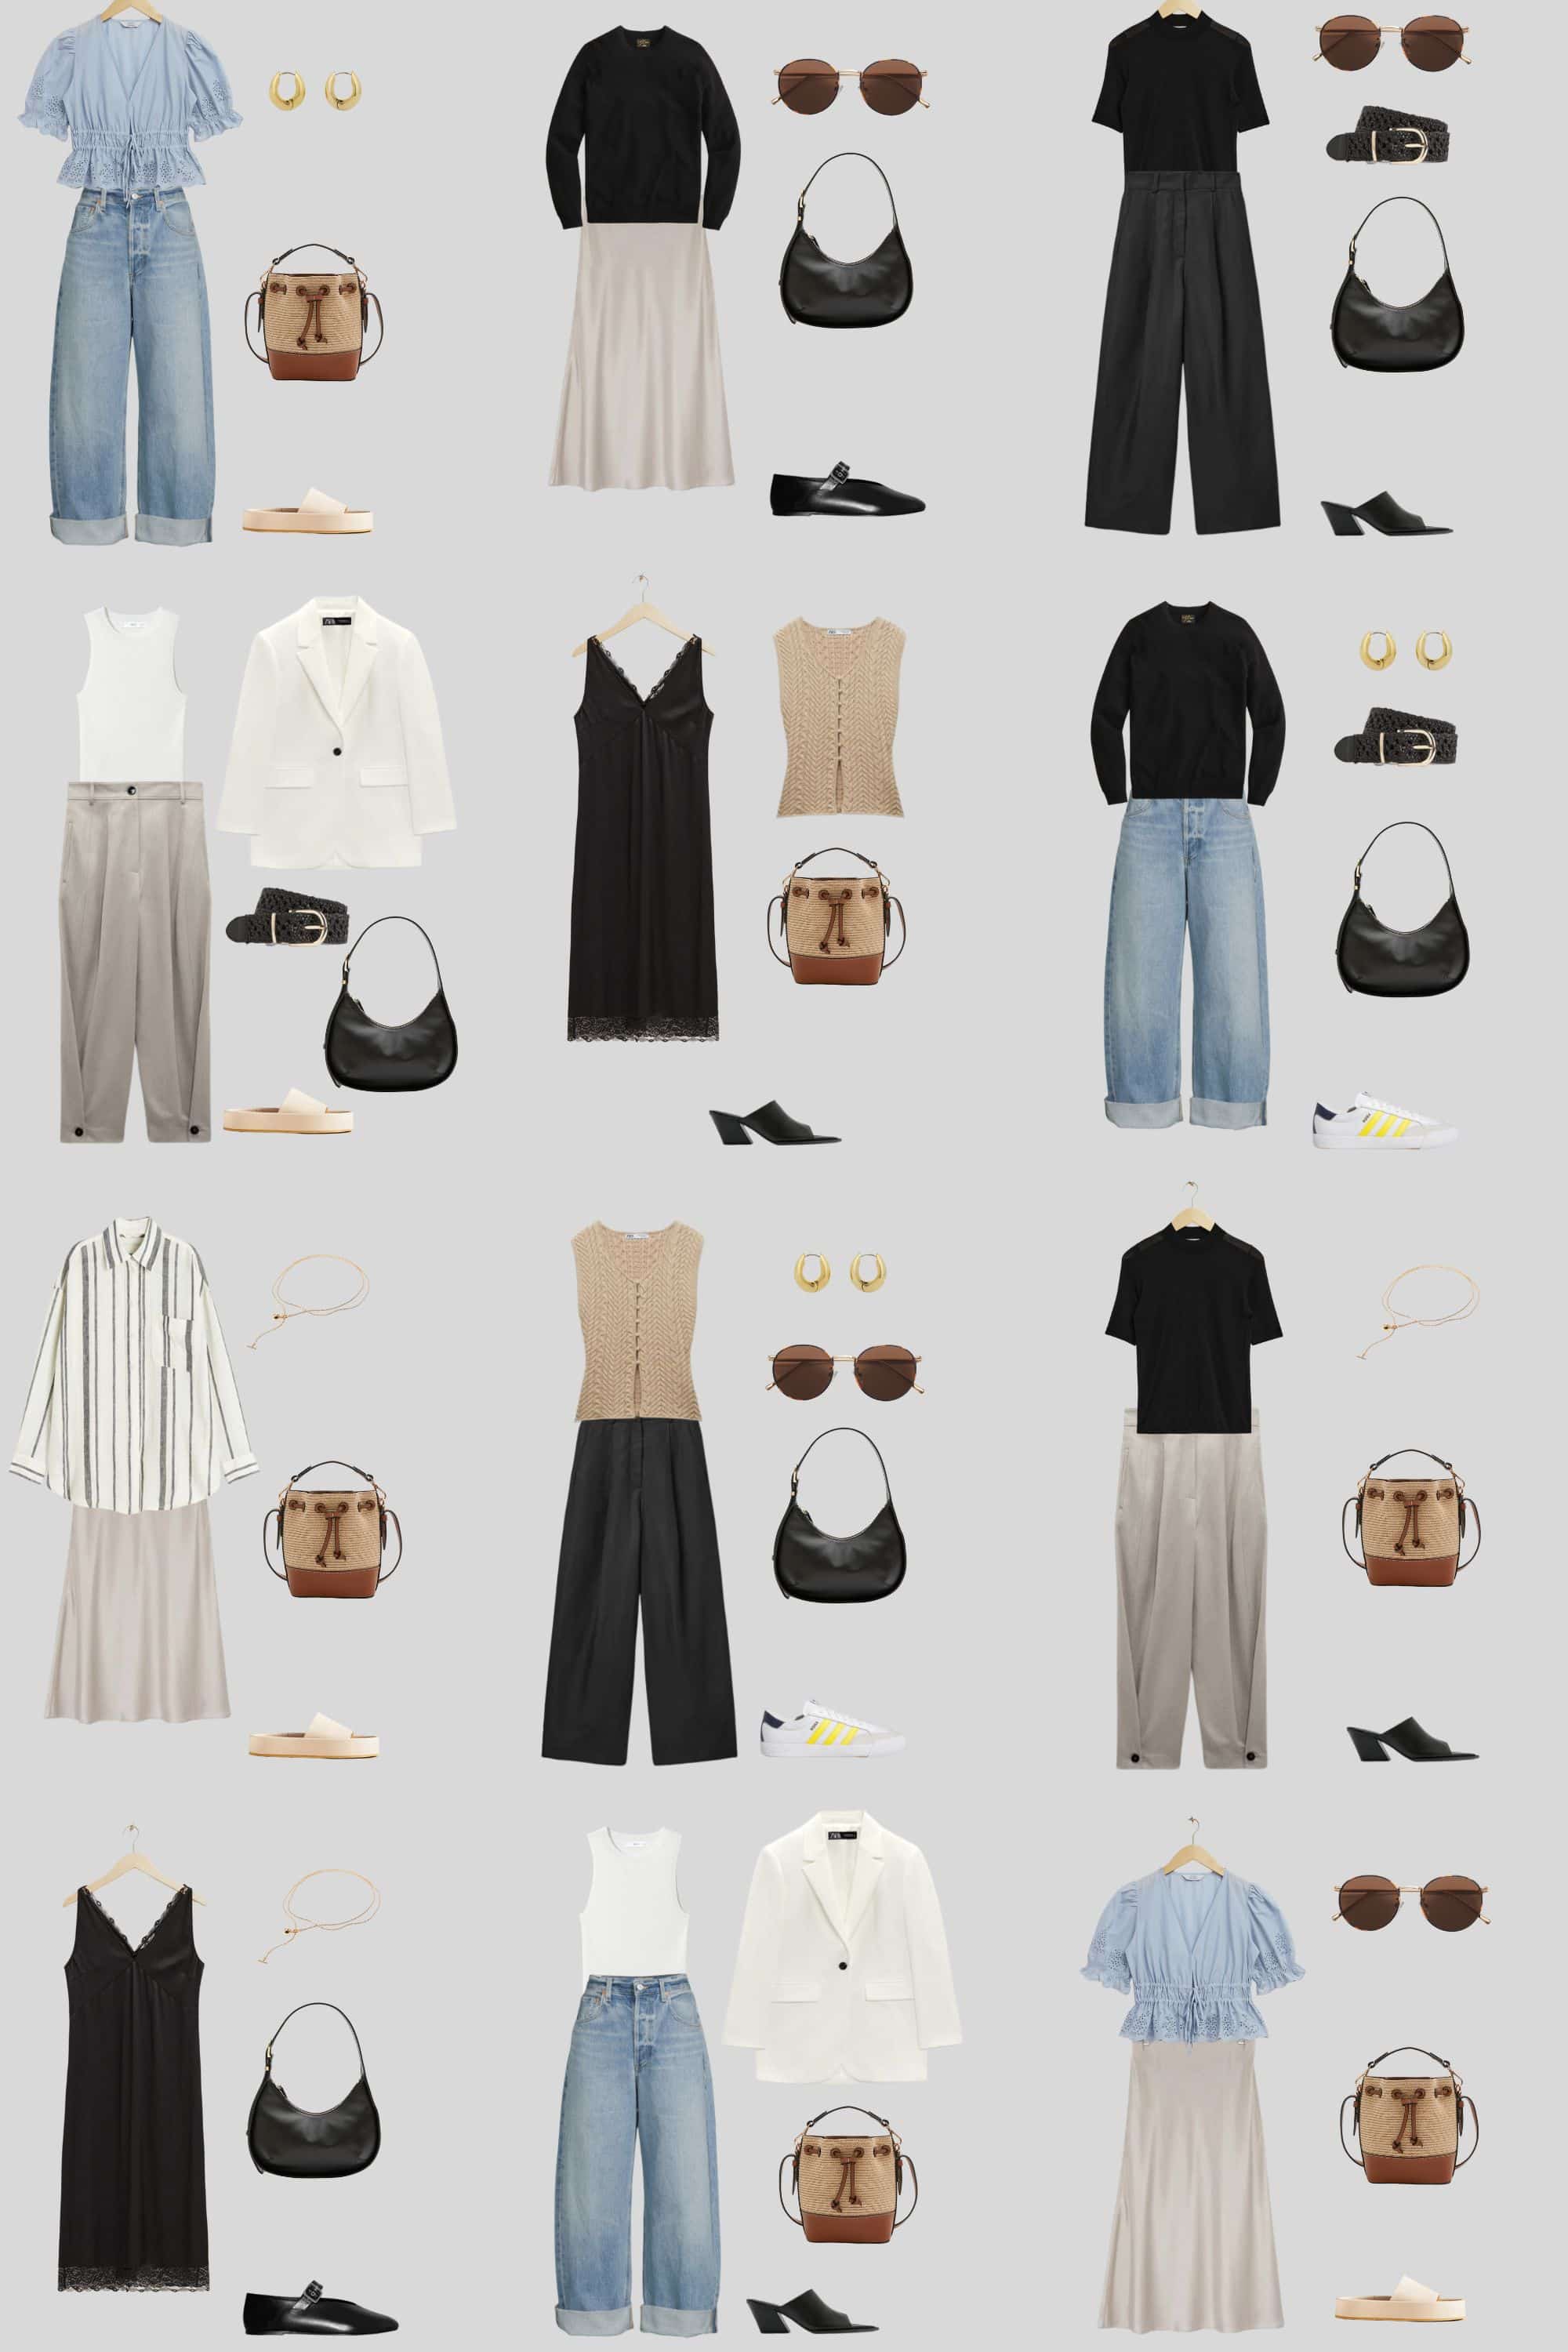 A light grey background with 12 outfits for a 12 Piece Minimalist Summer Capsule Wardrobe.